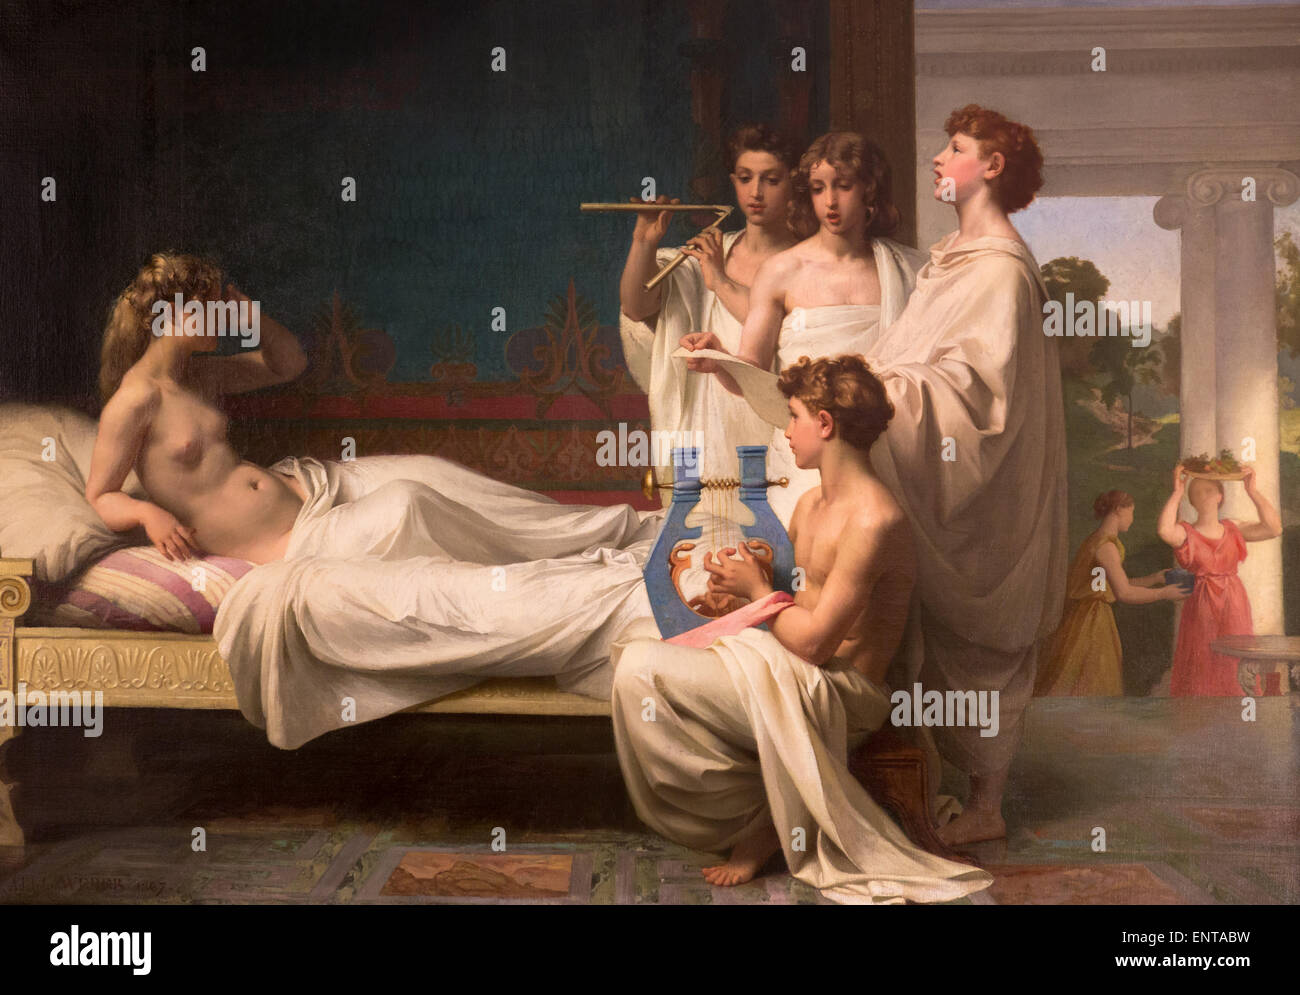 ActiveMuseum 0005947.jpg / The awakening of Psyche 05/12/2013  -   / 19th century Collection / Active Museum Stock Photo